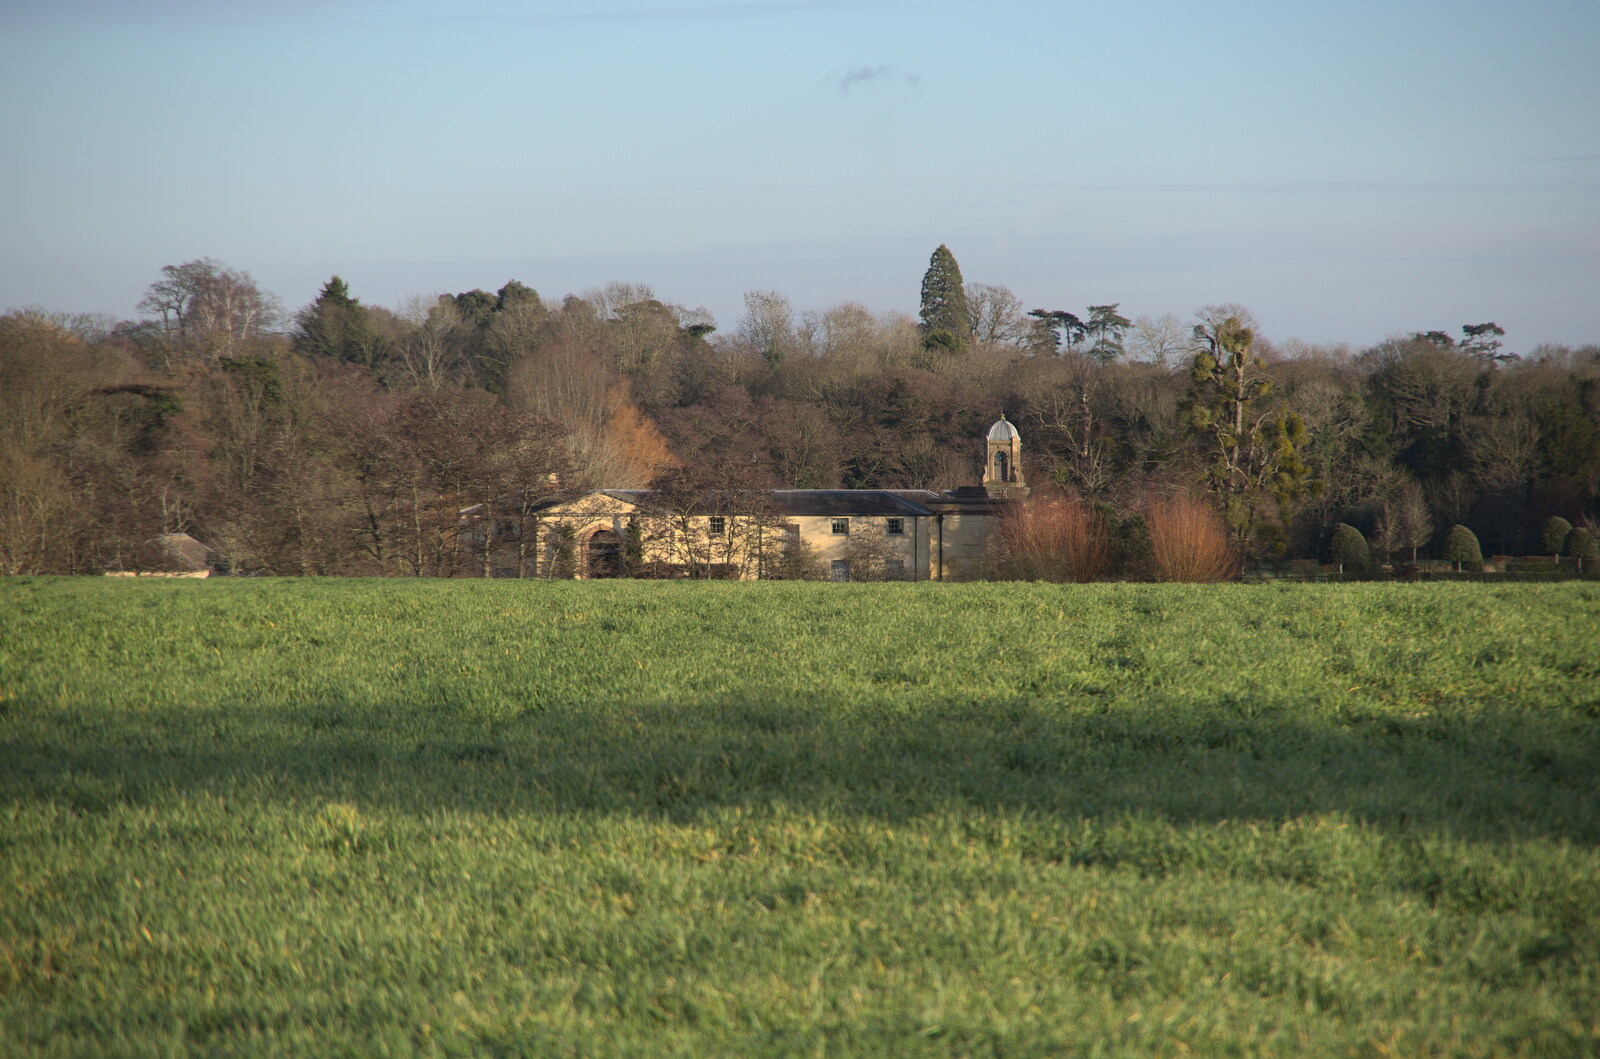 Winter Walks around Brome and Hoxne, Suffolk - 2nd January 2023: Oakley Park from across the field